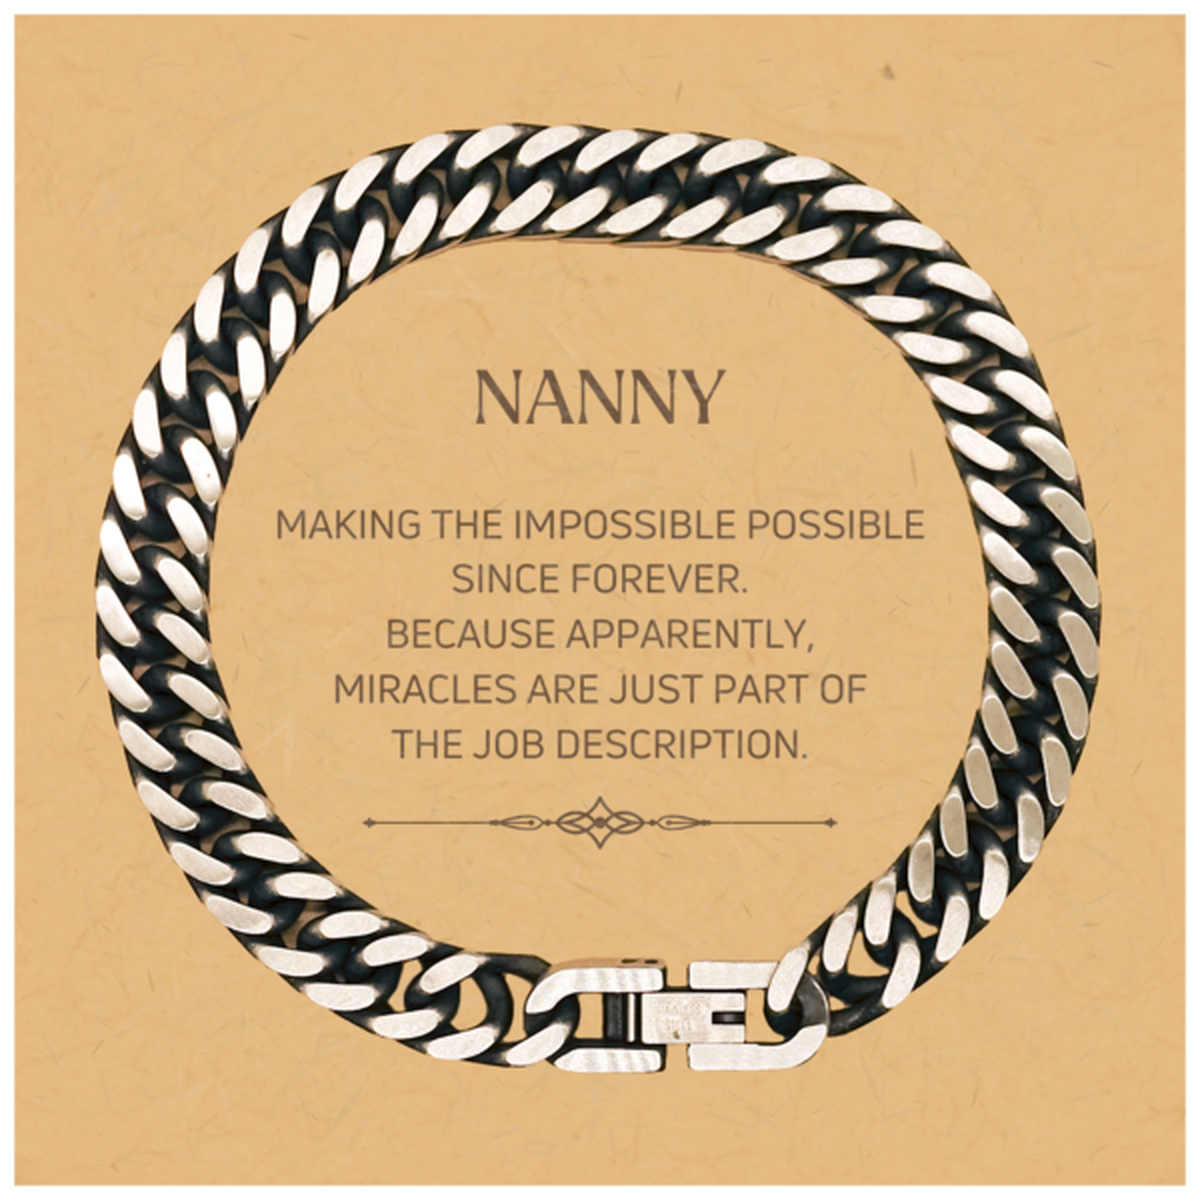 Funny Nanny Gifts, Miracles are just part of the job description, Inspirational Birthday Christmas Cuban Link Chain Bracelet For Nanny, Men, Women, Coworkers, Friends, Boss